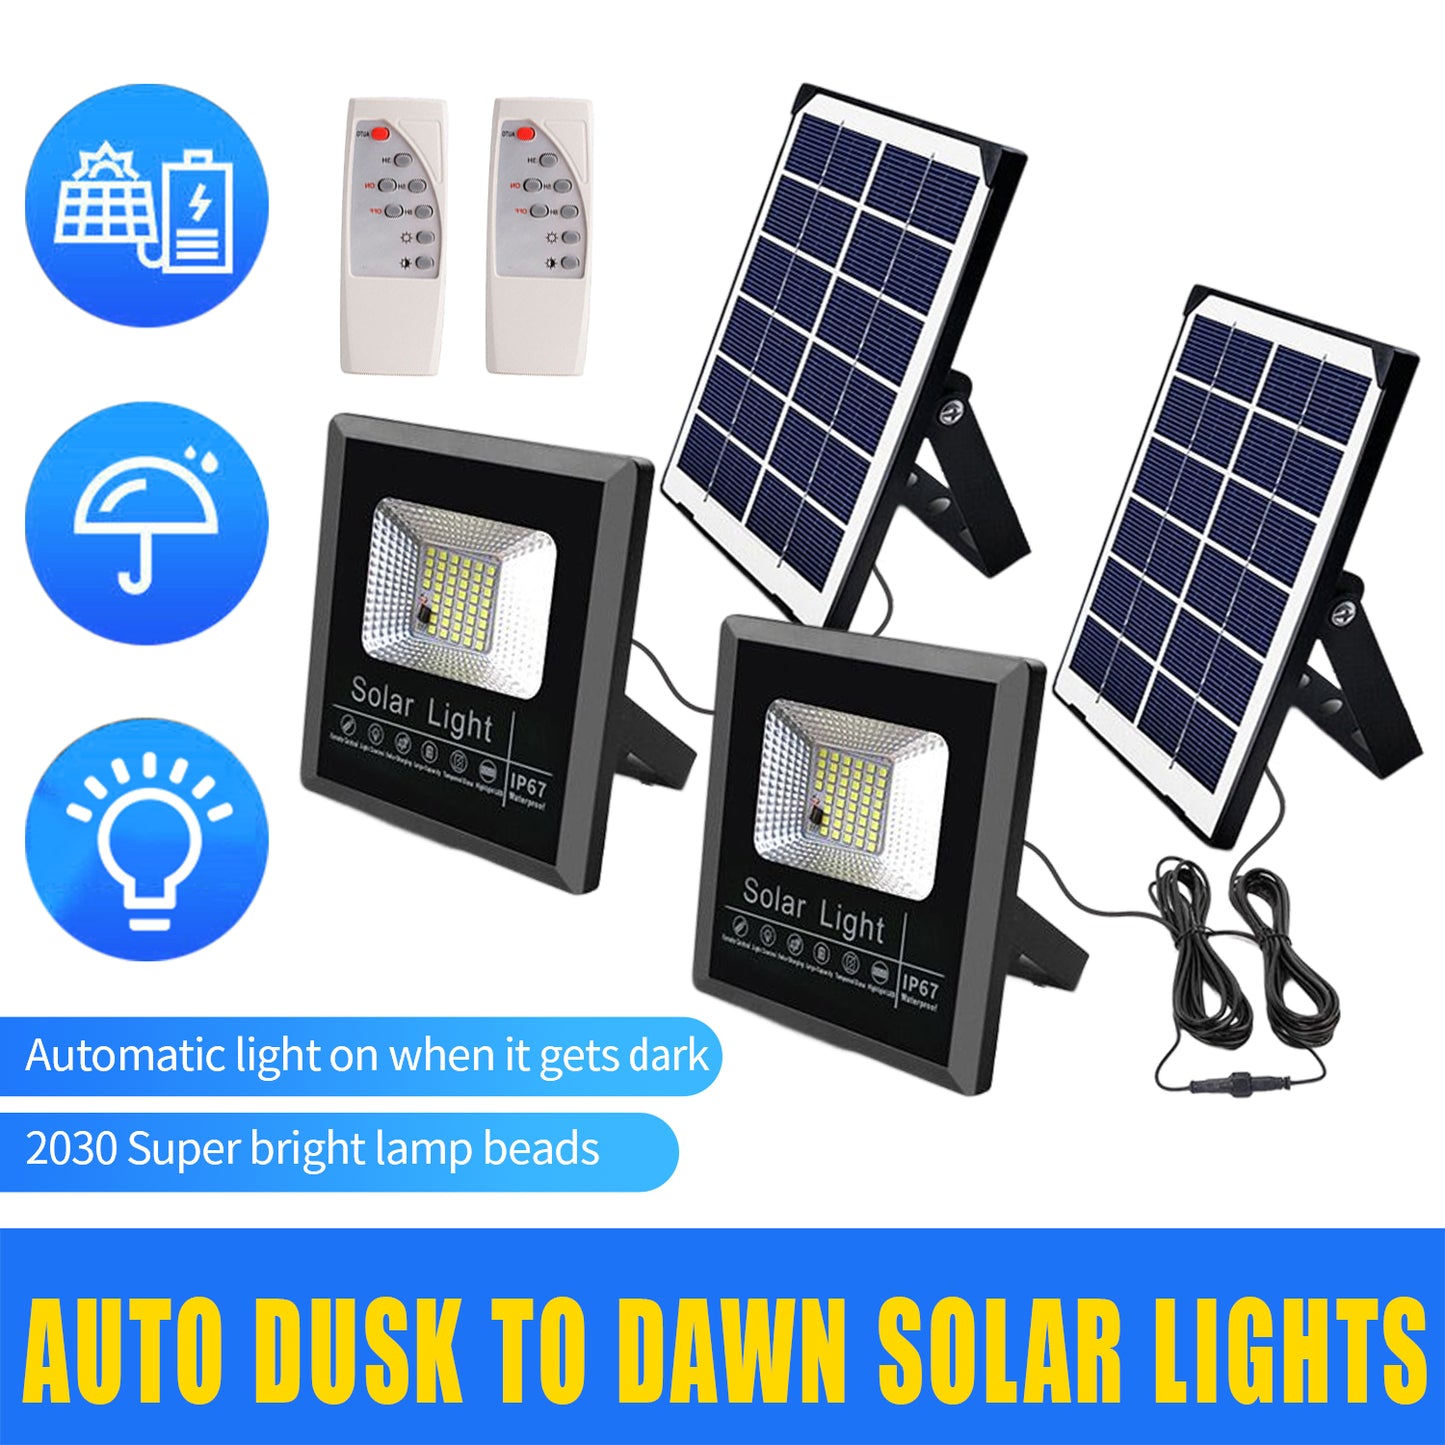 2 Pack Solar Flood Lights Outdoor, 3500LM Auto Dusk to Dawn Solar Lights Waterproof, Ultra Bright Solar Security Flood Light with Time Control Perfect for Barn, Garage, Warehouse, Yard, Garden